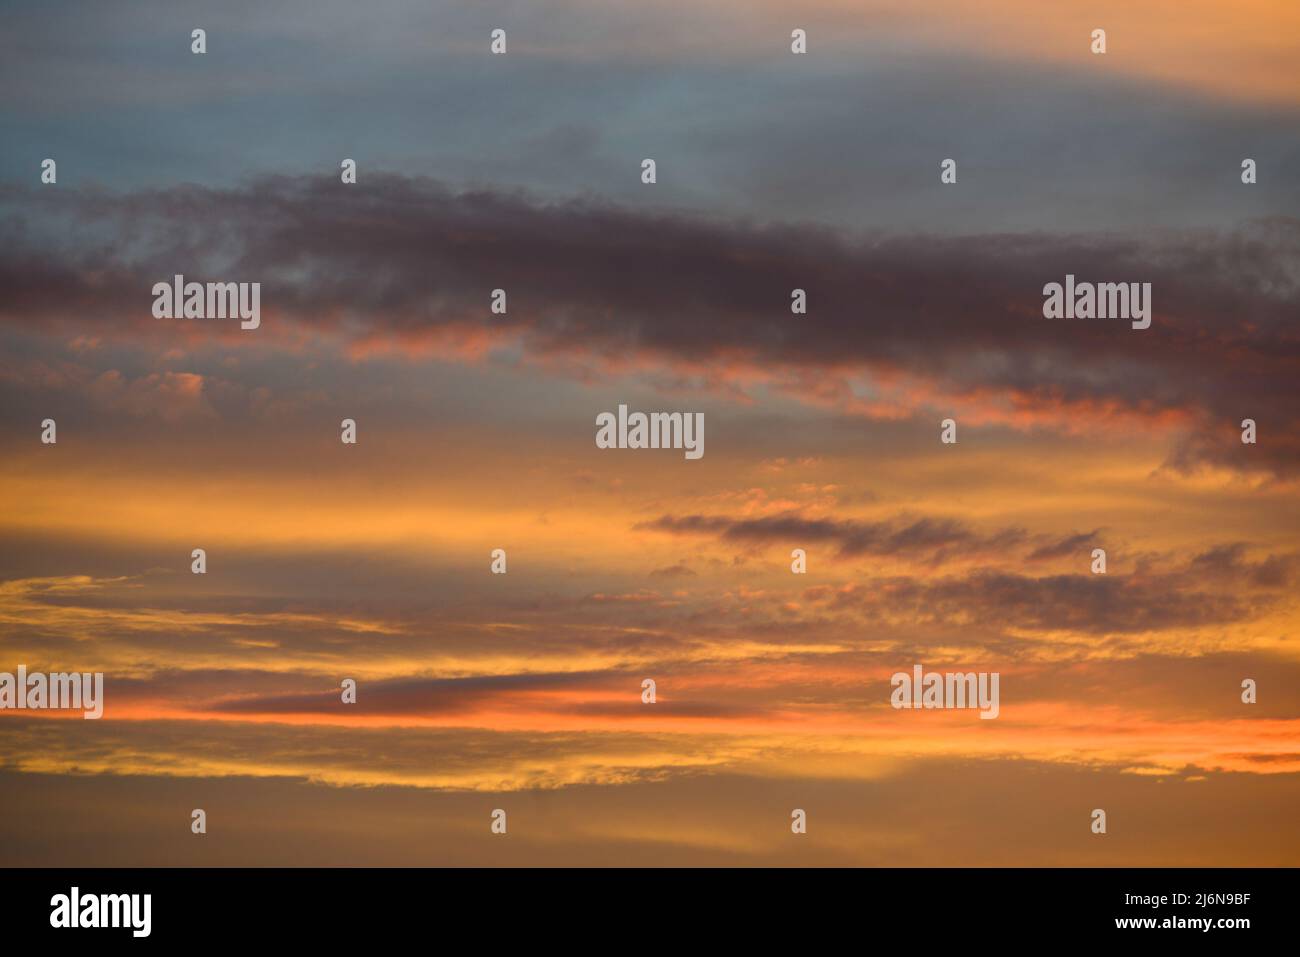 Sky with colorful orange and yellow clouds at sunset with space for text Stock Photo